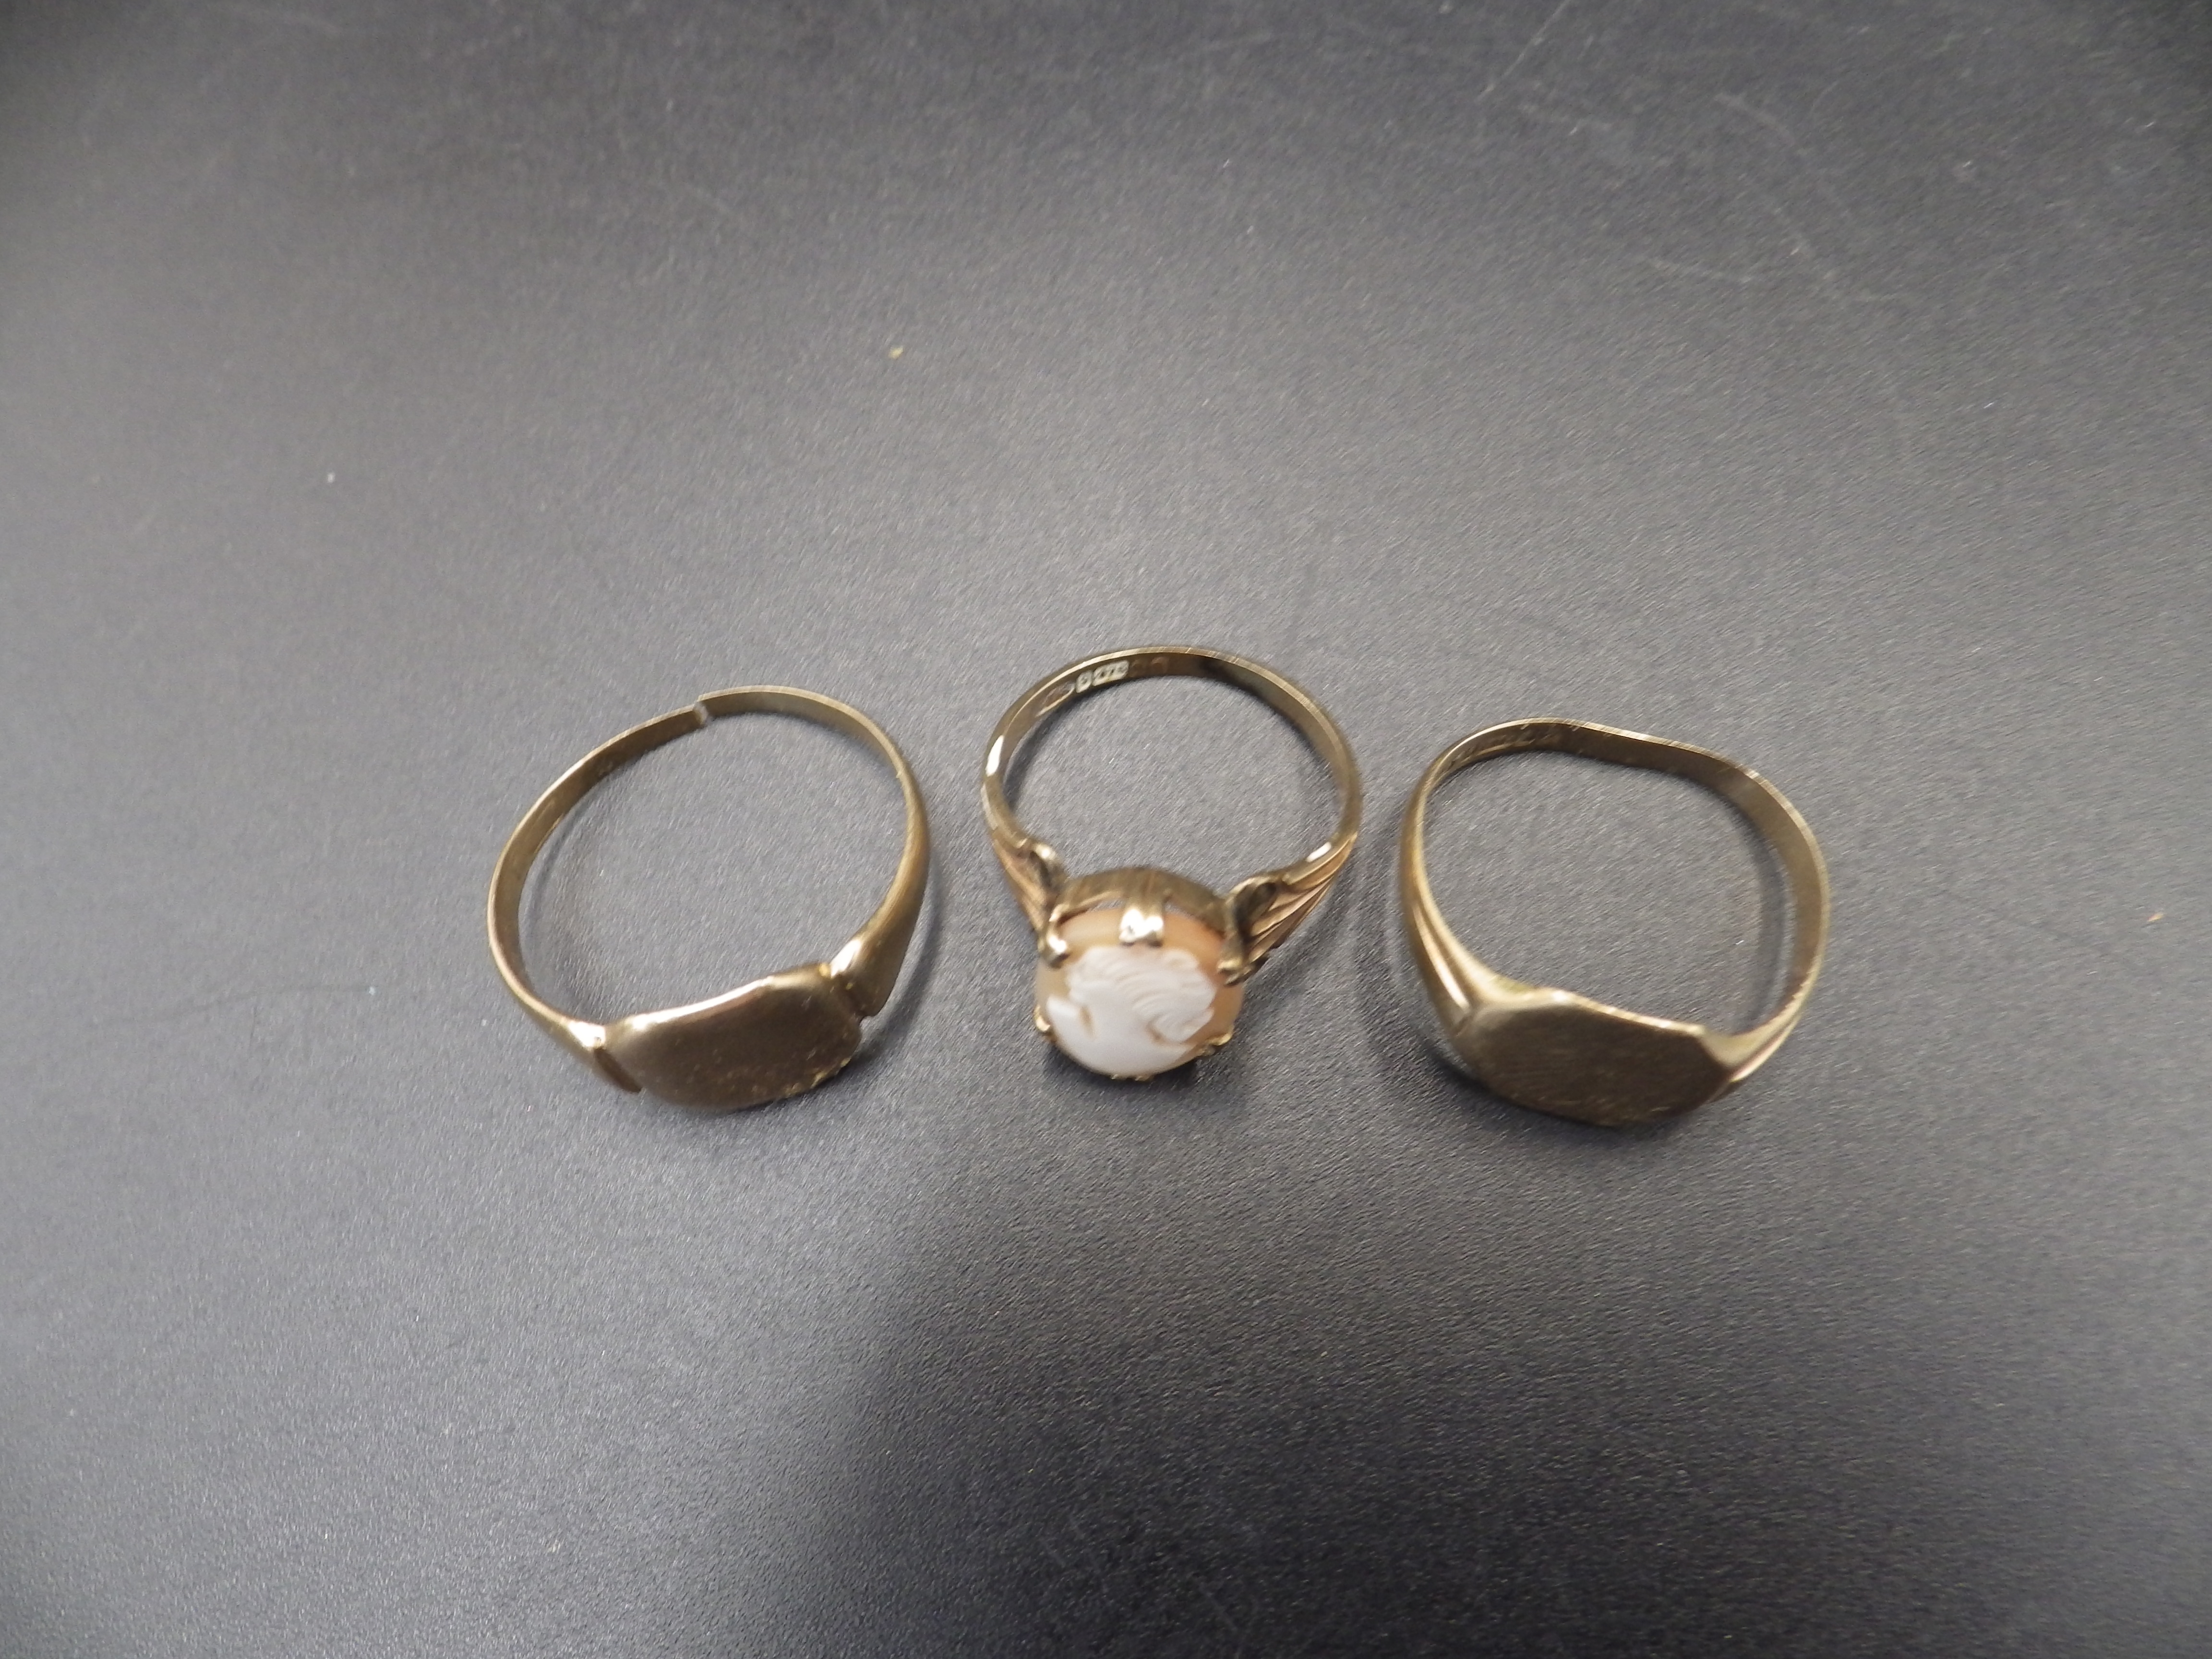 3 x 9ct gold rings (to include a cameo ring) one ring has been cut, 9.51g total lot weight - Image 3 of 3